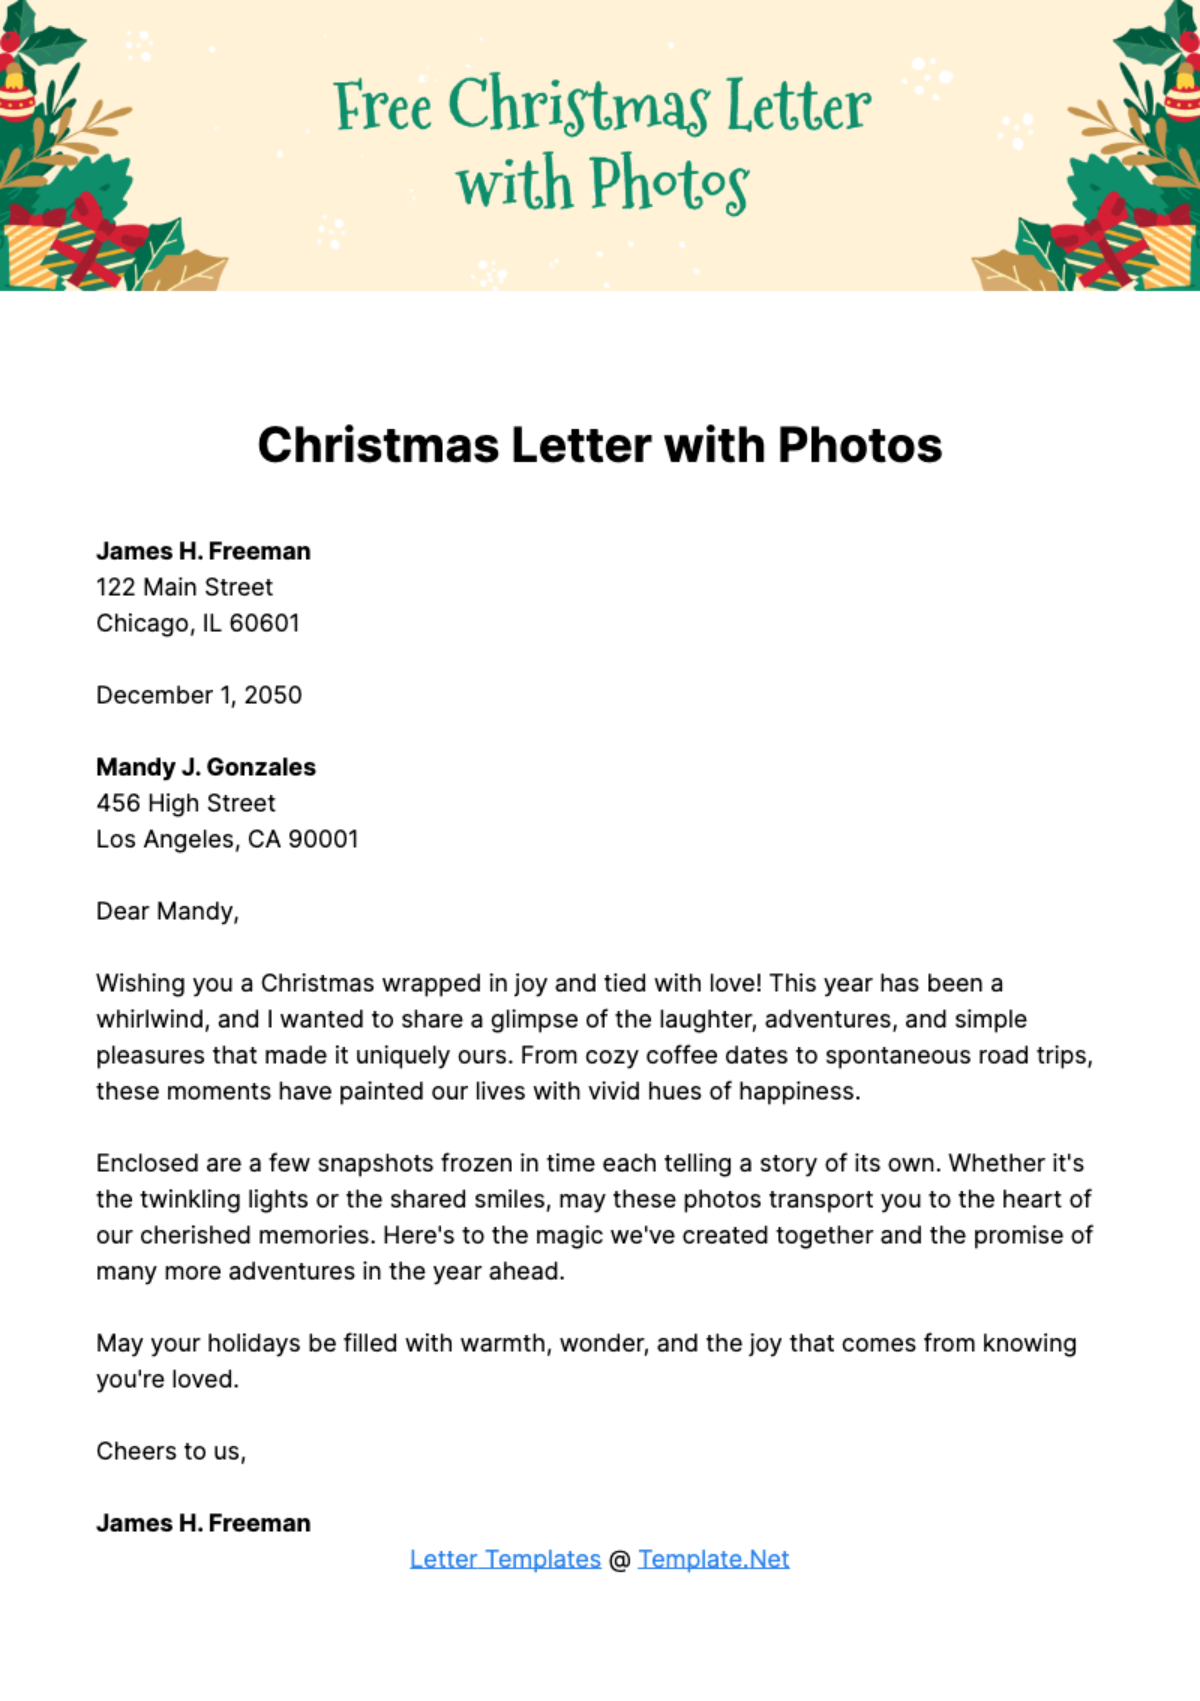 Free Christmas Letter with Photos Template